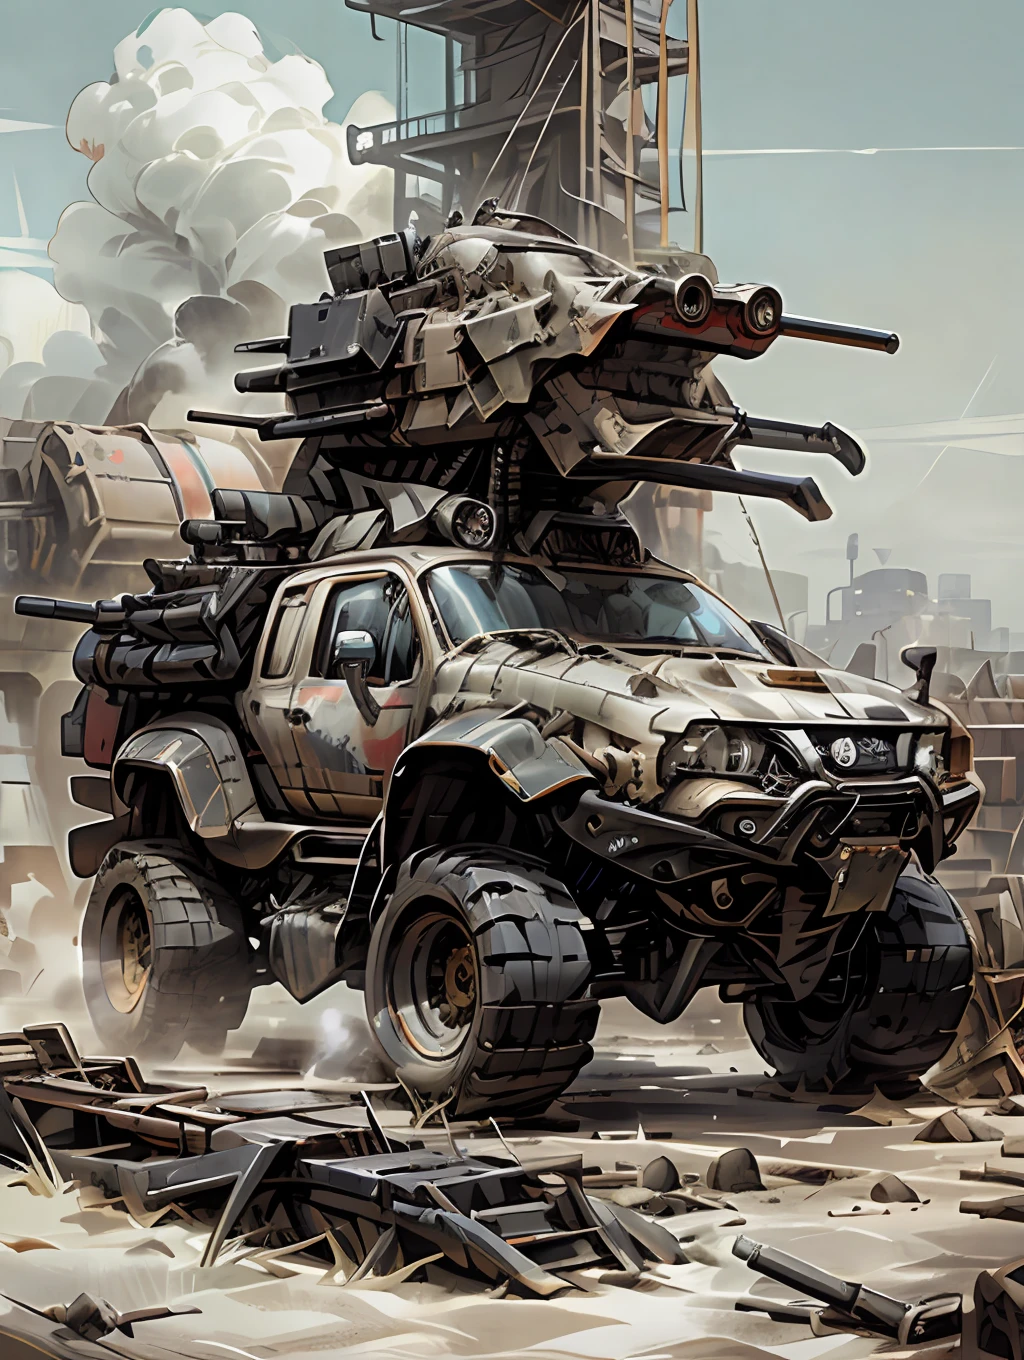 DISEL PUNK, araf cargo truck on the back (WEAPONS, CANNONS, DESTRUCTIVE, MISSILES, SUBMACHINE GUNS), concept art by Aleksander Kobzdej, deviantart, self-destructive art, EXTREMELY full of alien military equipment, military transport platform with apocalyptic weapons and missiles, in Mad Max style, polished and intricate state-of-the-art military vehicles, heavily armored, mechanized transport full of mechanics,  Futuristic vehicle, concept vehicle with incredible apocalyptic adaptations, vehicles, fully armored, redneck, perfect combination of war vehicles, technology and science, ((((Extremely detailed, finely tuned and defined, finely detailed, extremely intricate,